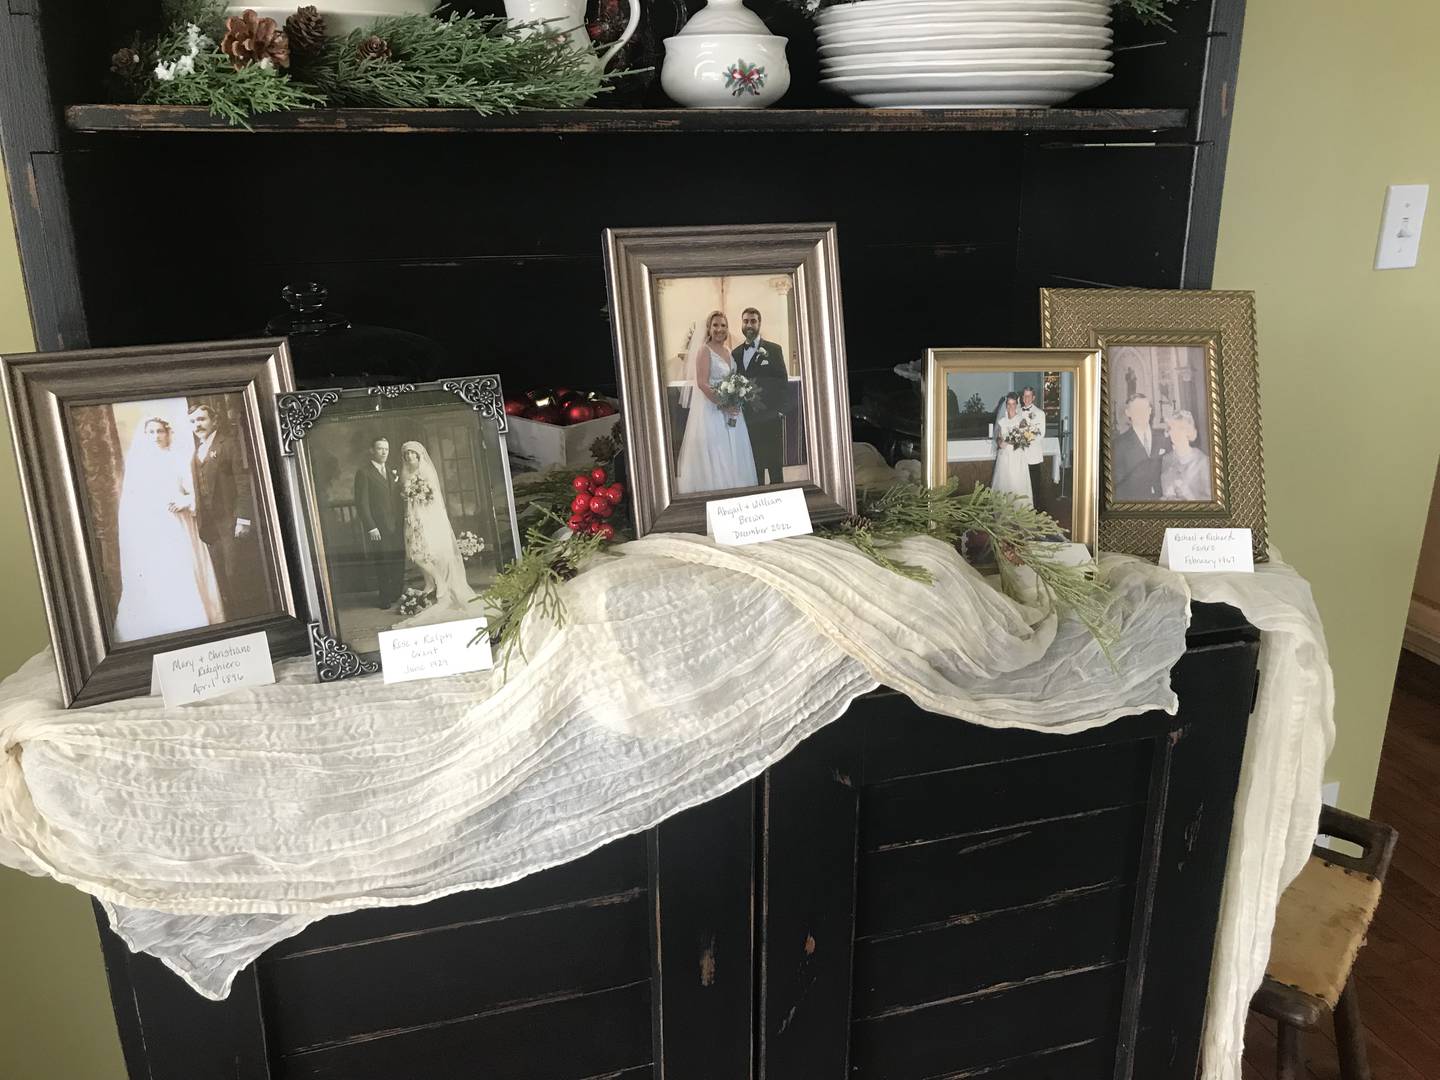 Abigail and William Brown’s wedding photo sits on a stand at Abigail’ Brown's mother’s home. Abigail Brown was the fifth generation of women in their family to get married at St. Joseph Catholic Church in Lockport.